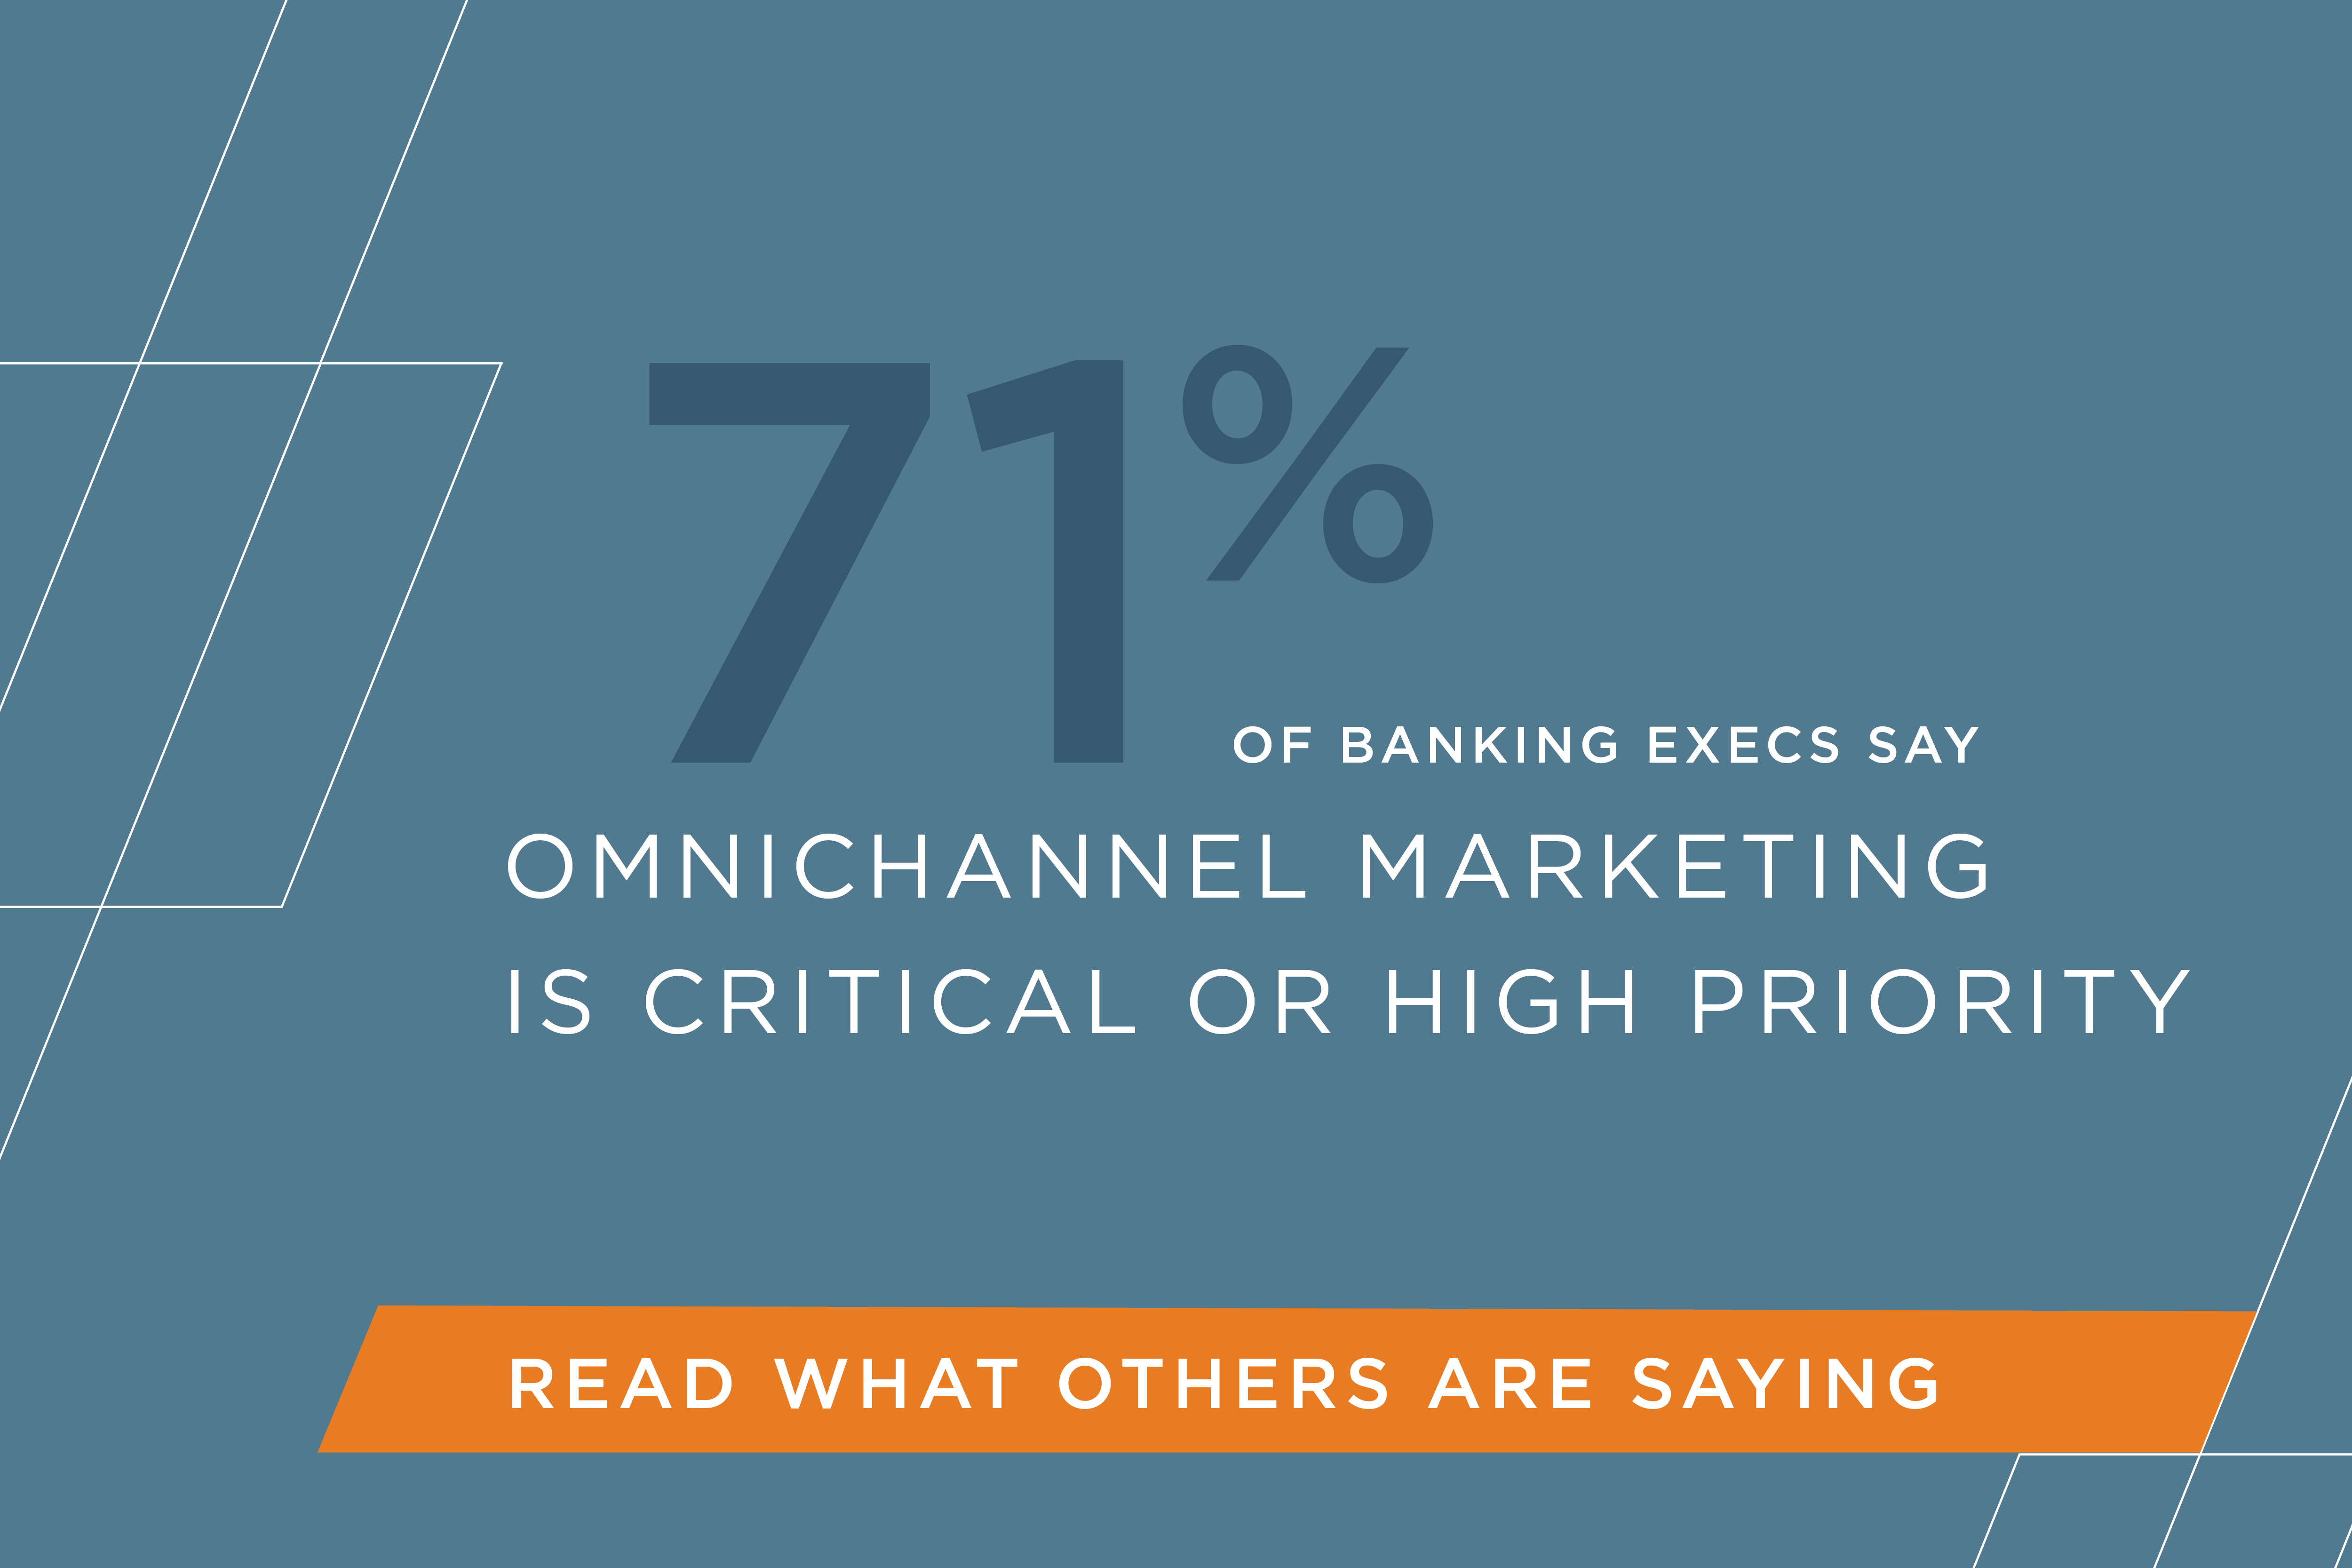 71% of leaders surveyed cite omnichannel marketing strategies as a critical or high priority for their business